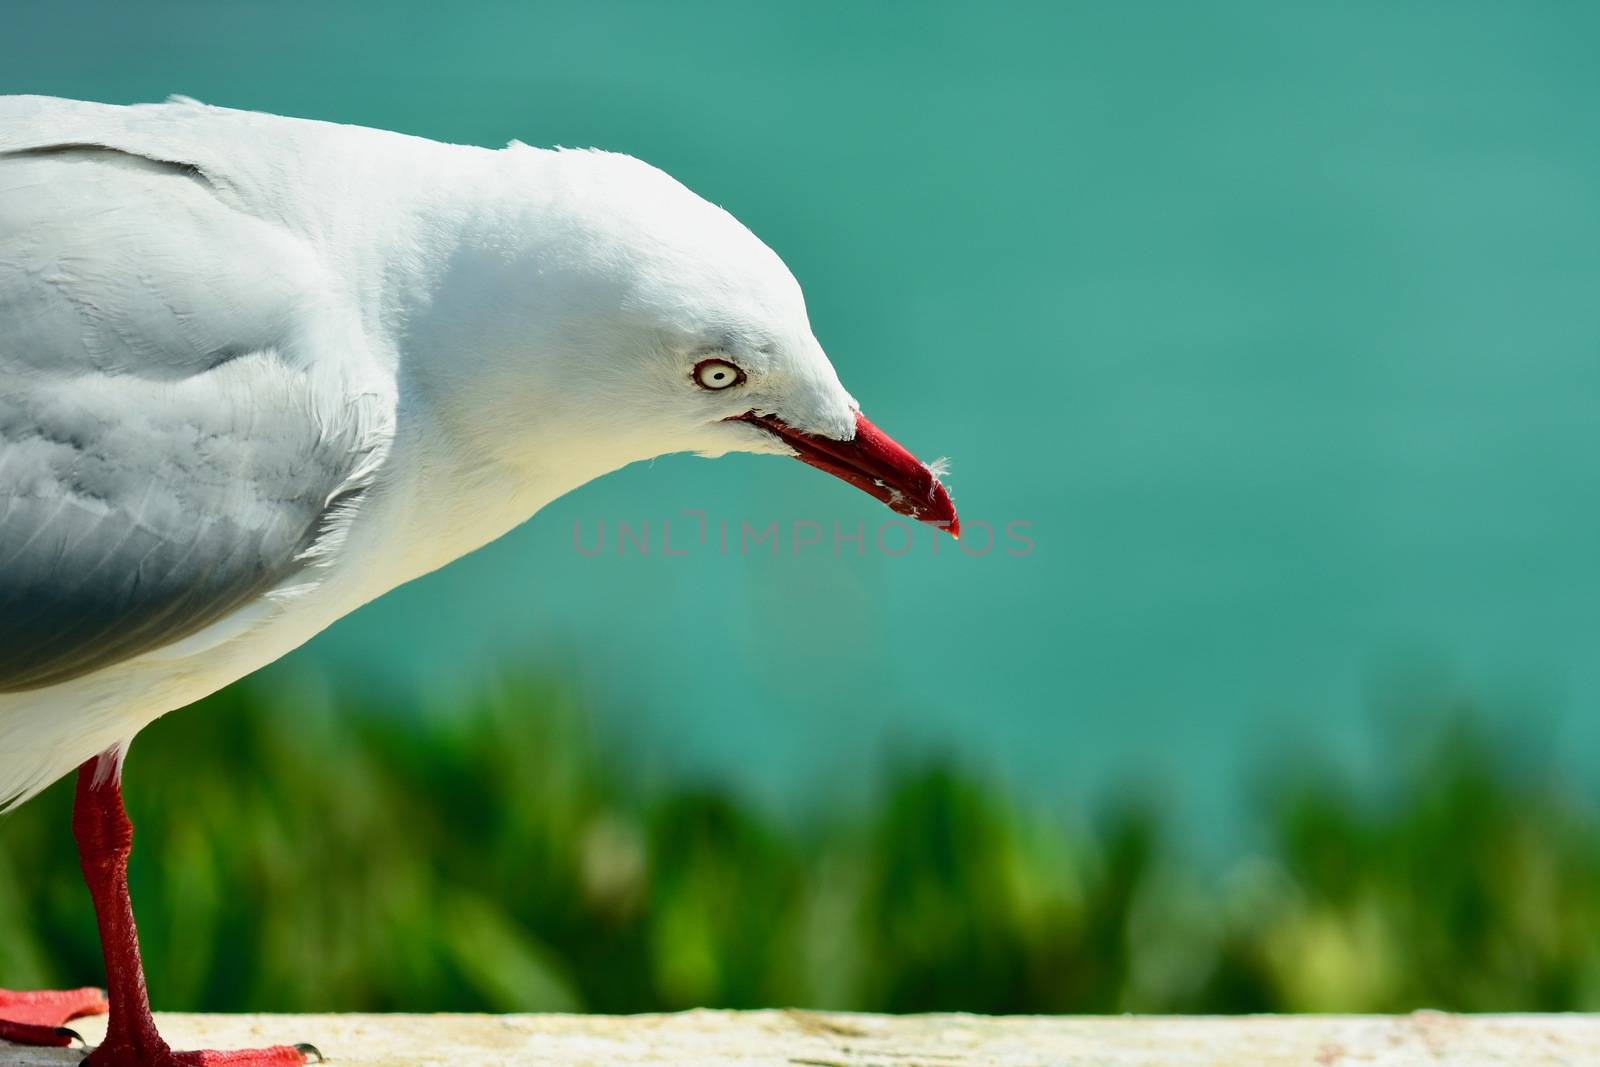 A close-up portrait of a red-beaked gull. This is the most common gulls of the shore, red-billed gulls are found all around the New Zealand coast. by Marshalkina